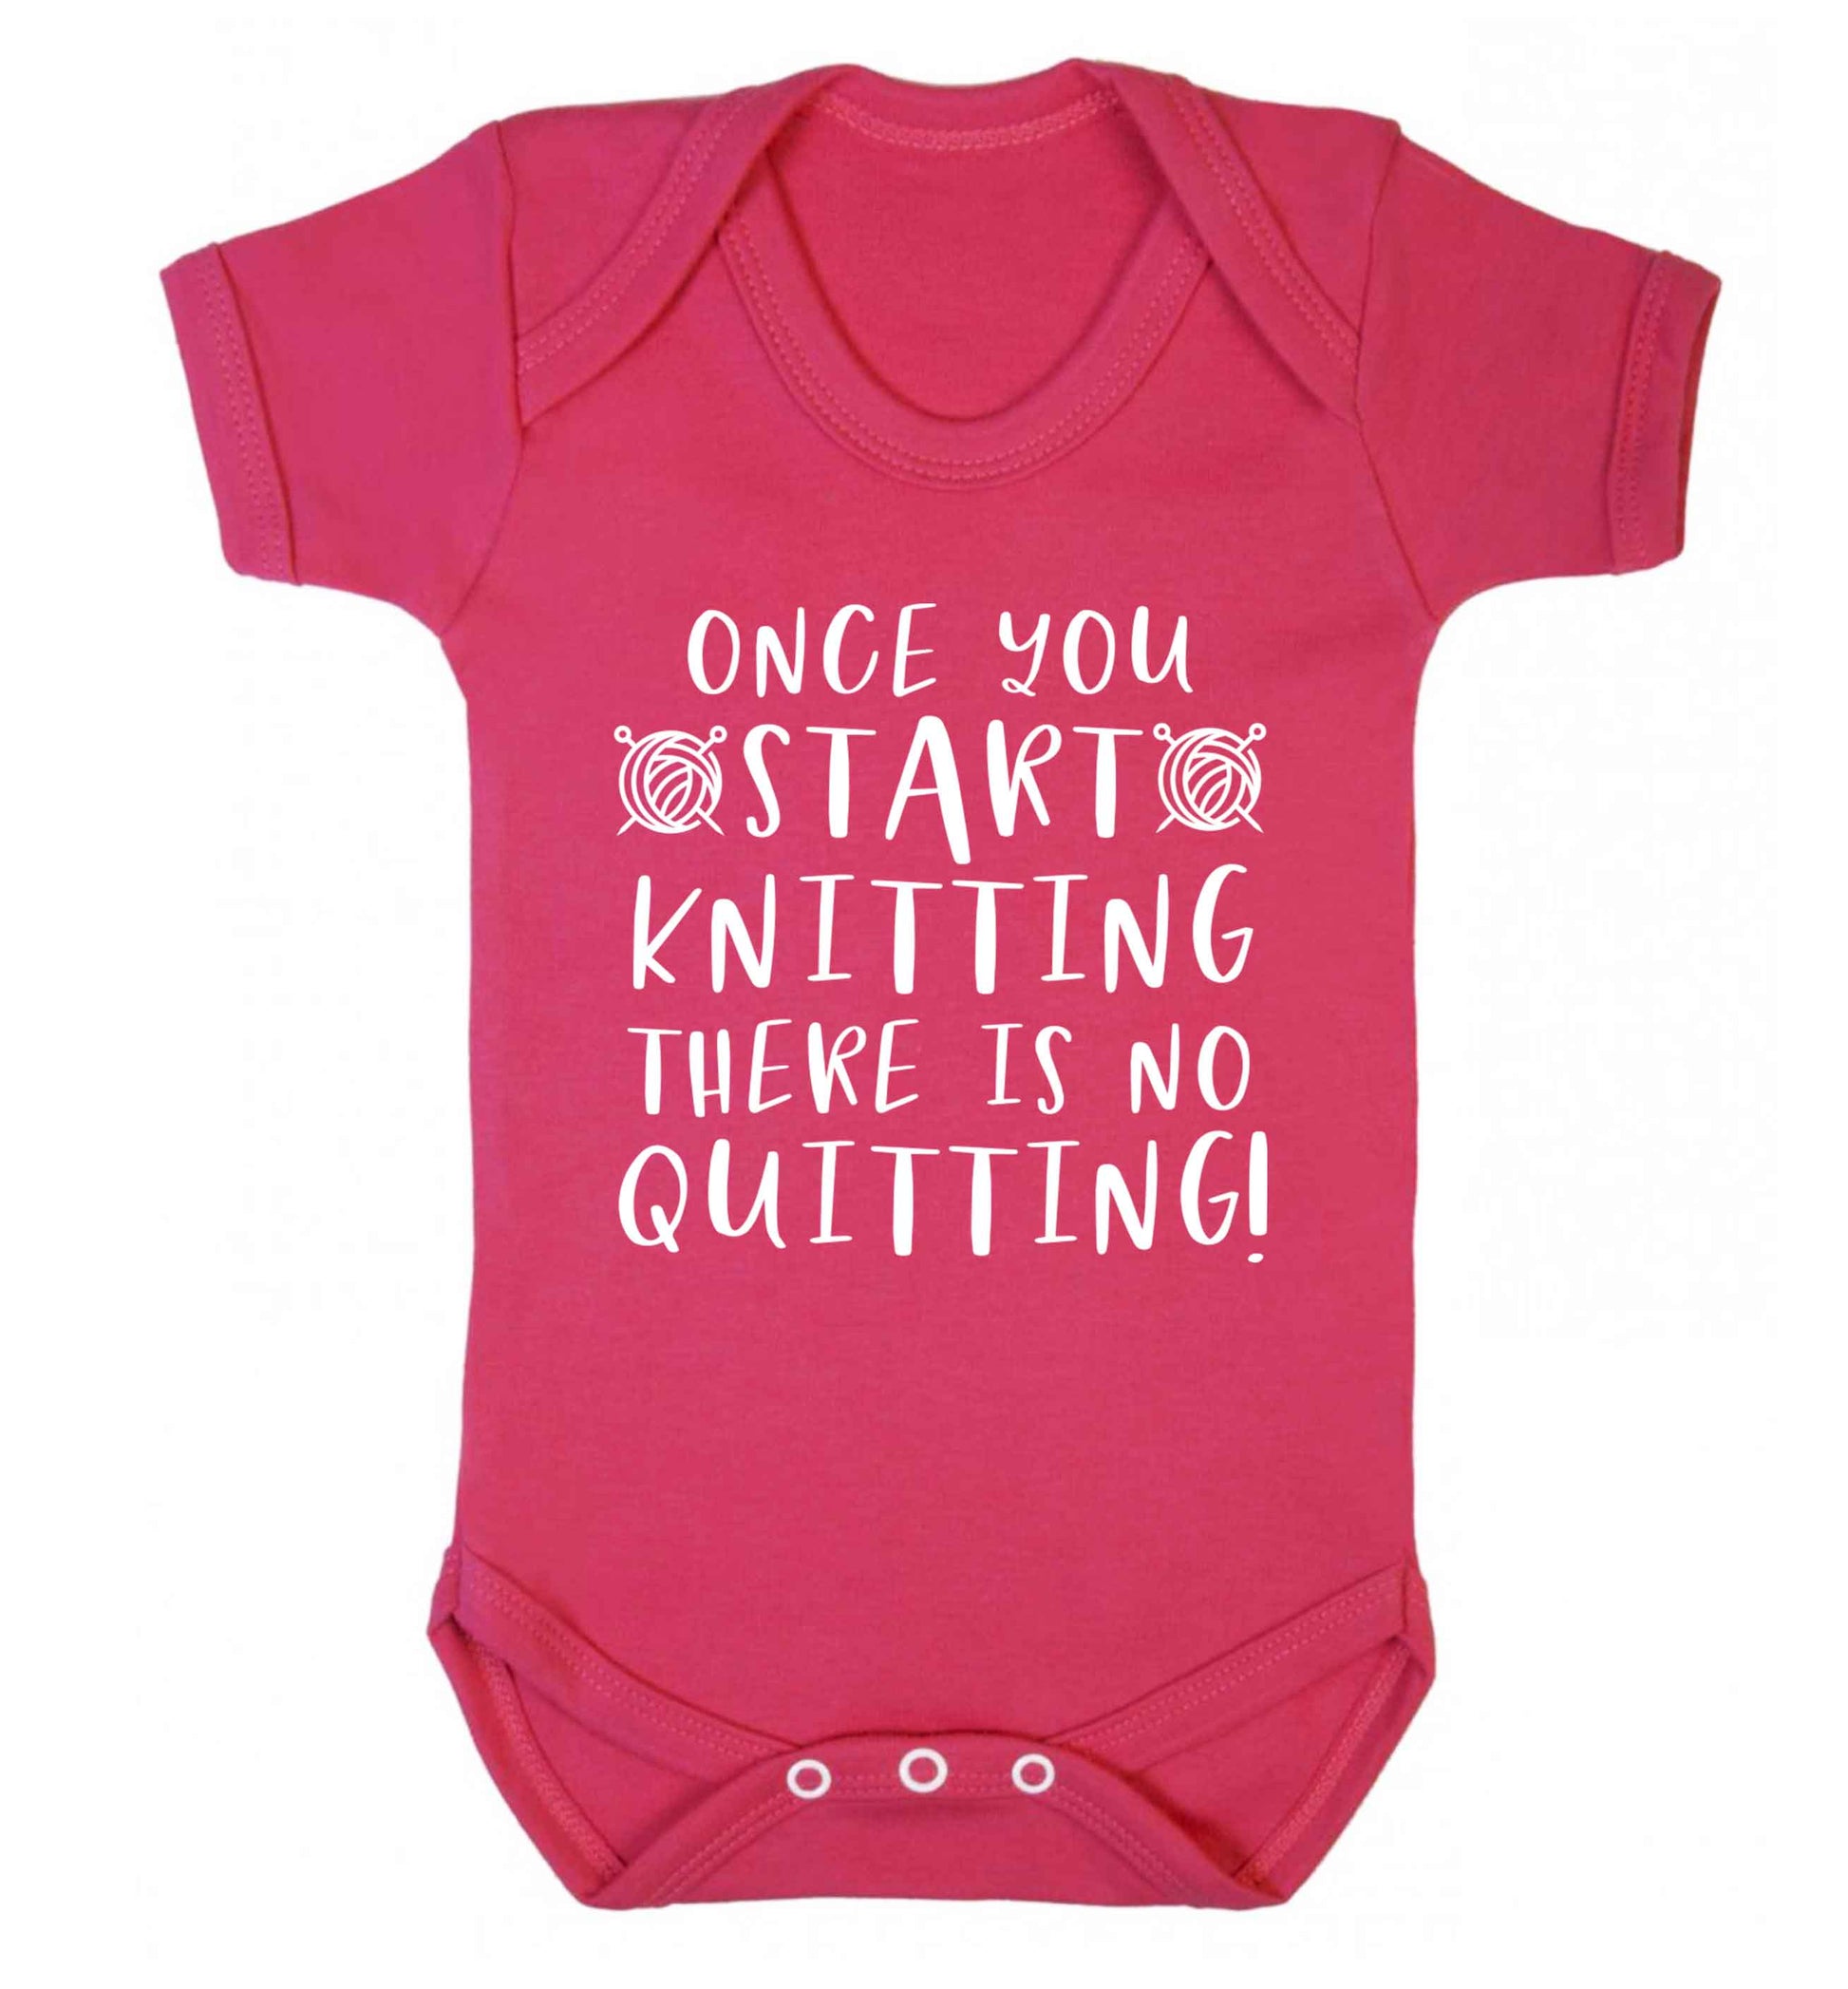 Once you start knitting there is no quitting! Baby Vest dark pink 18-24 months